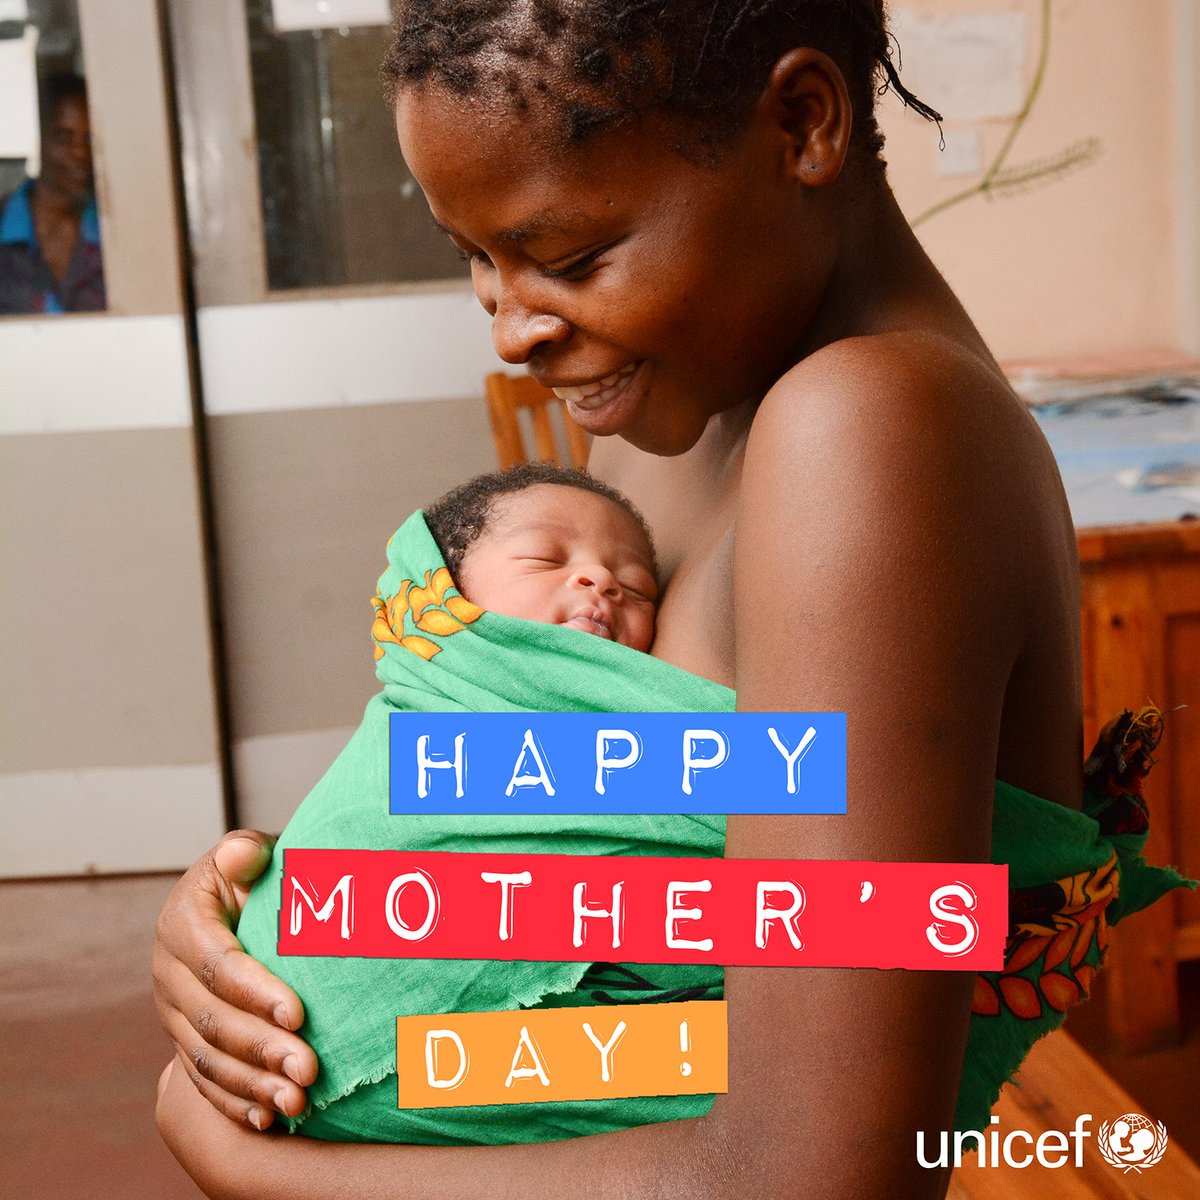 RT @UNICEF: This #MothersDay, we say a big THANK YOU to all the amazing mothers & mother figures worldwide! https://t.co/dhjHZdWRGe